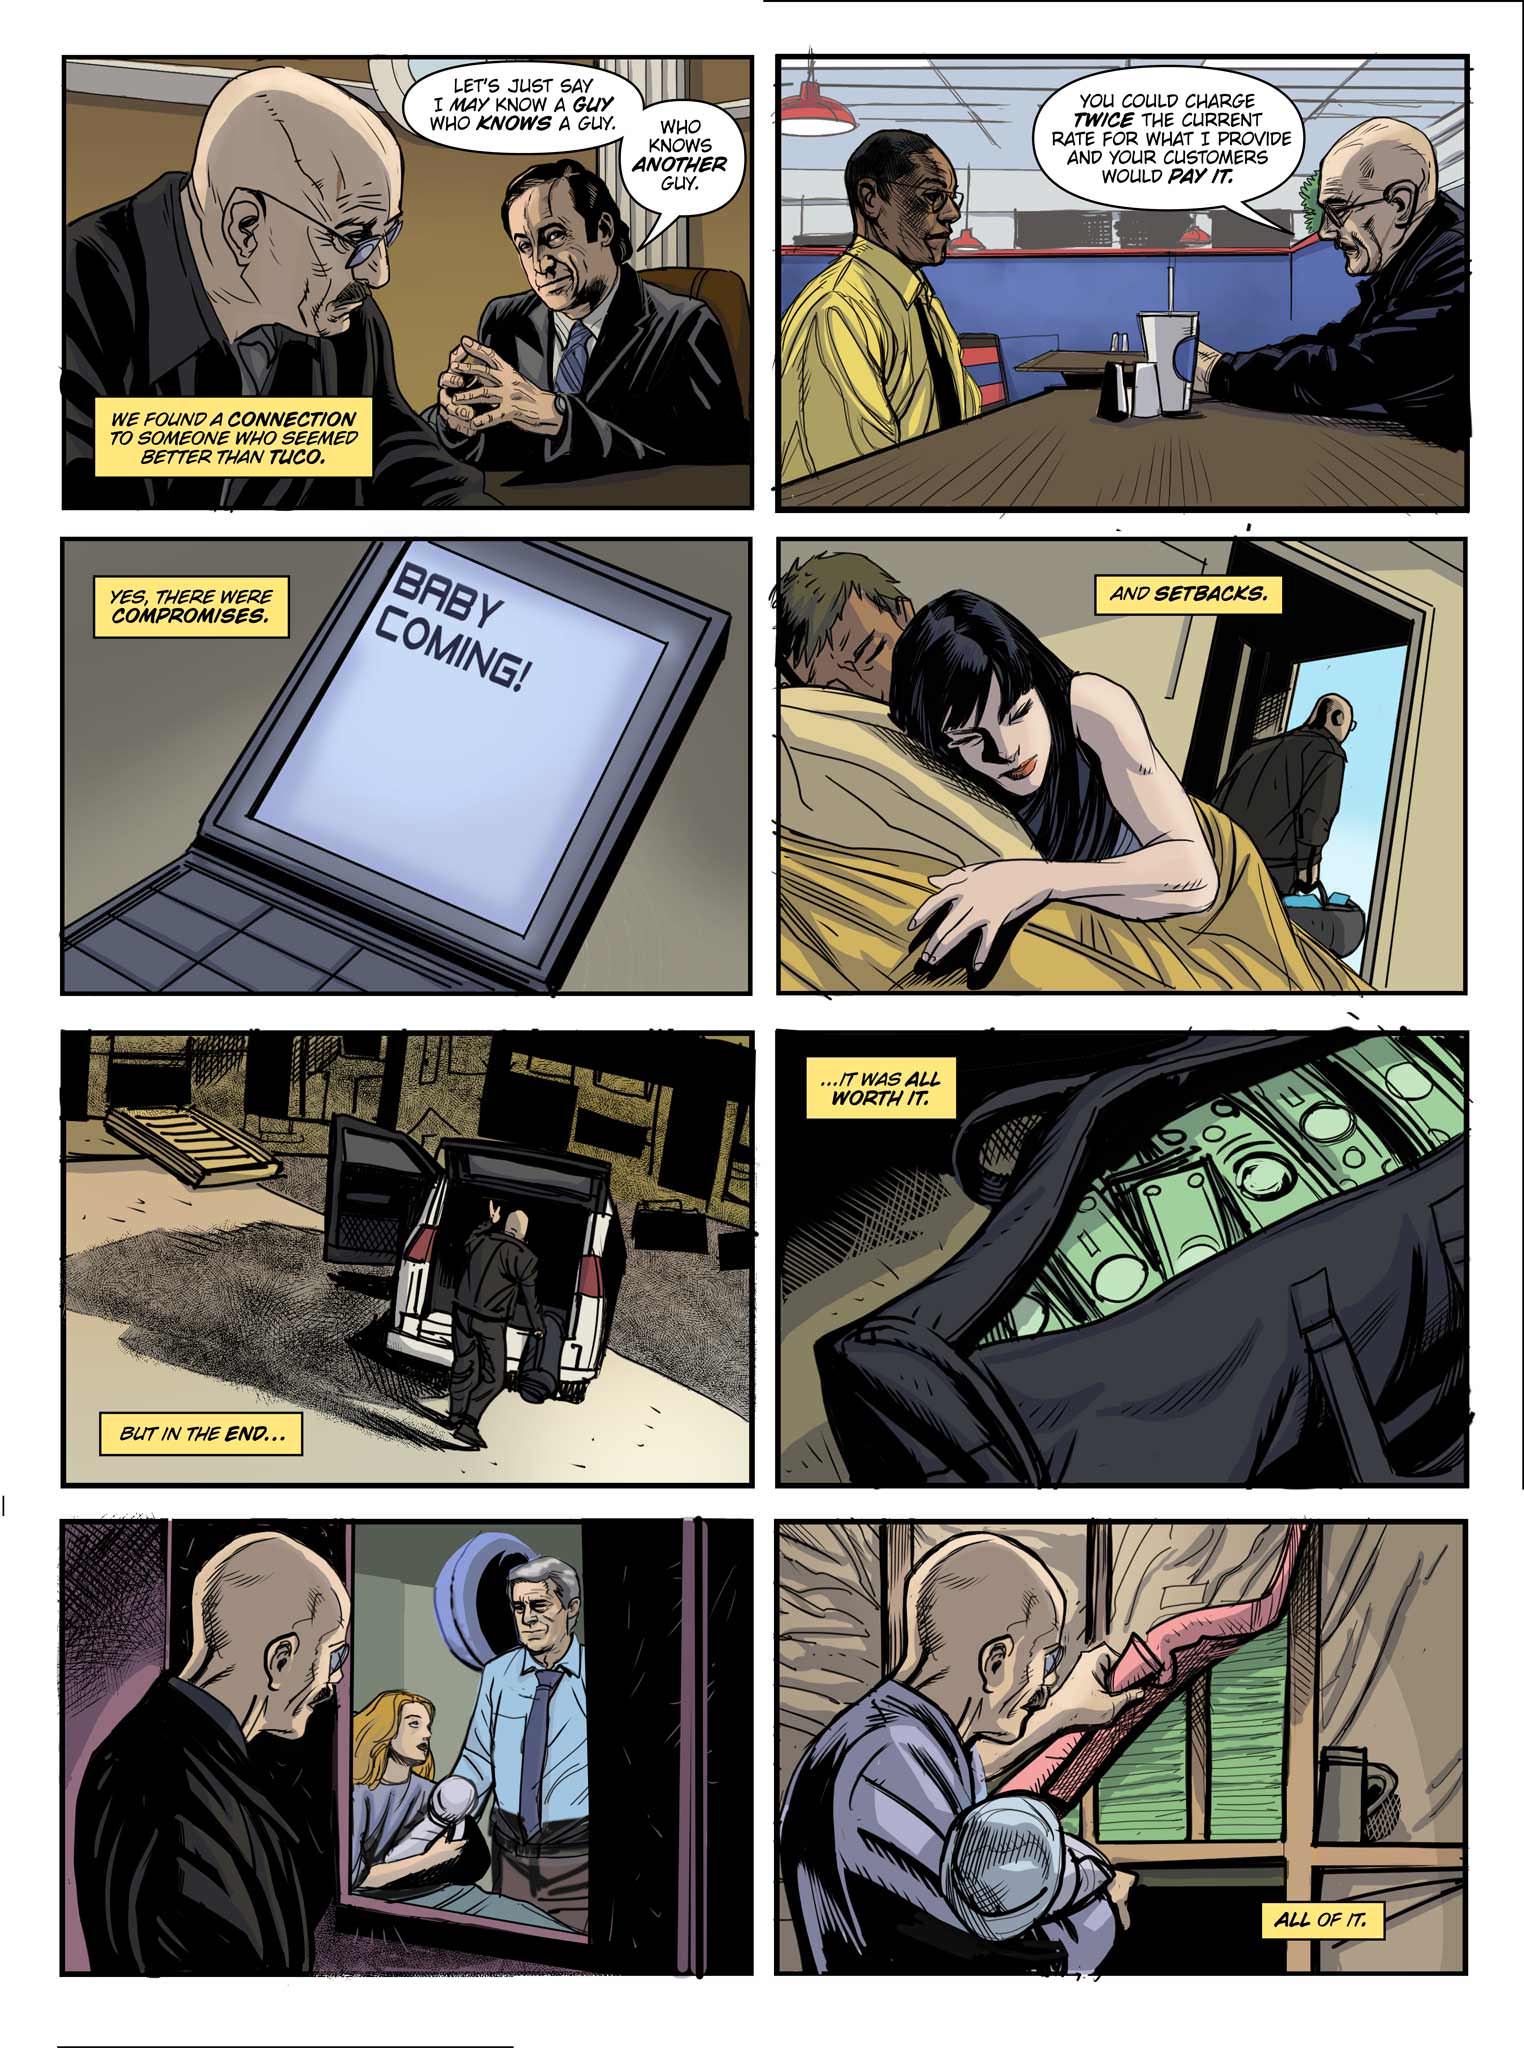 Read online Breaking Bad: All Bad Things comic -  Issue # Full - 8